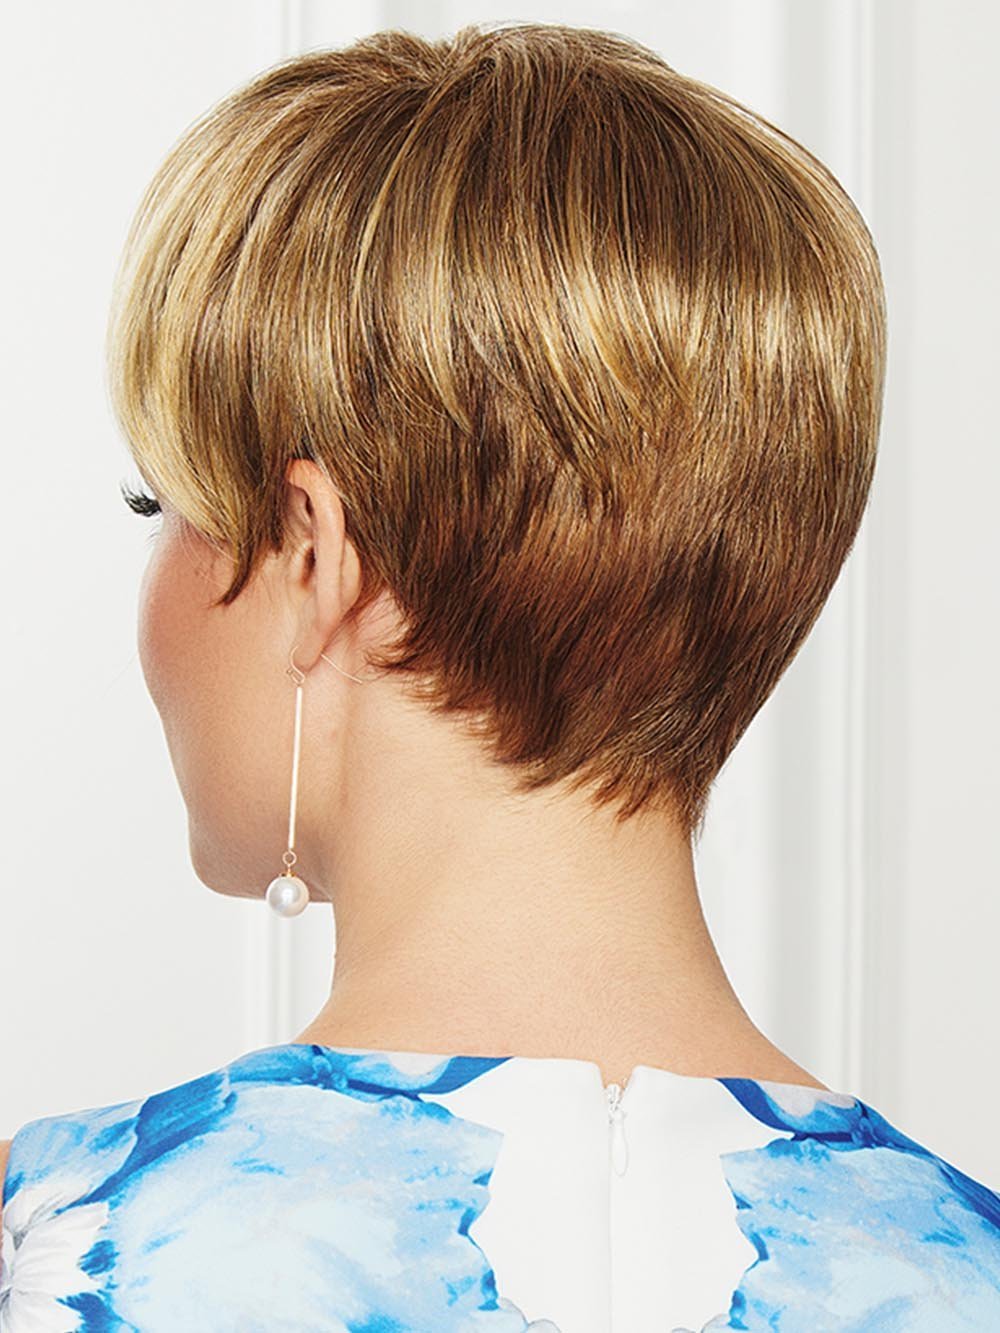 While the shorter sides and nape area present a polished, refined edge